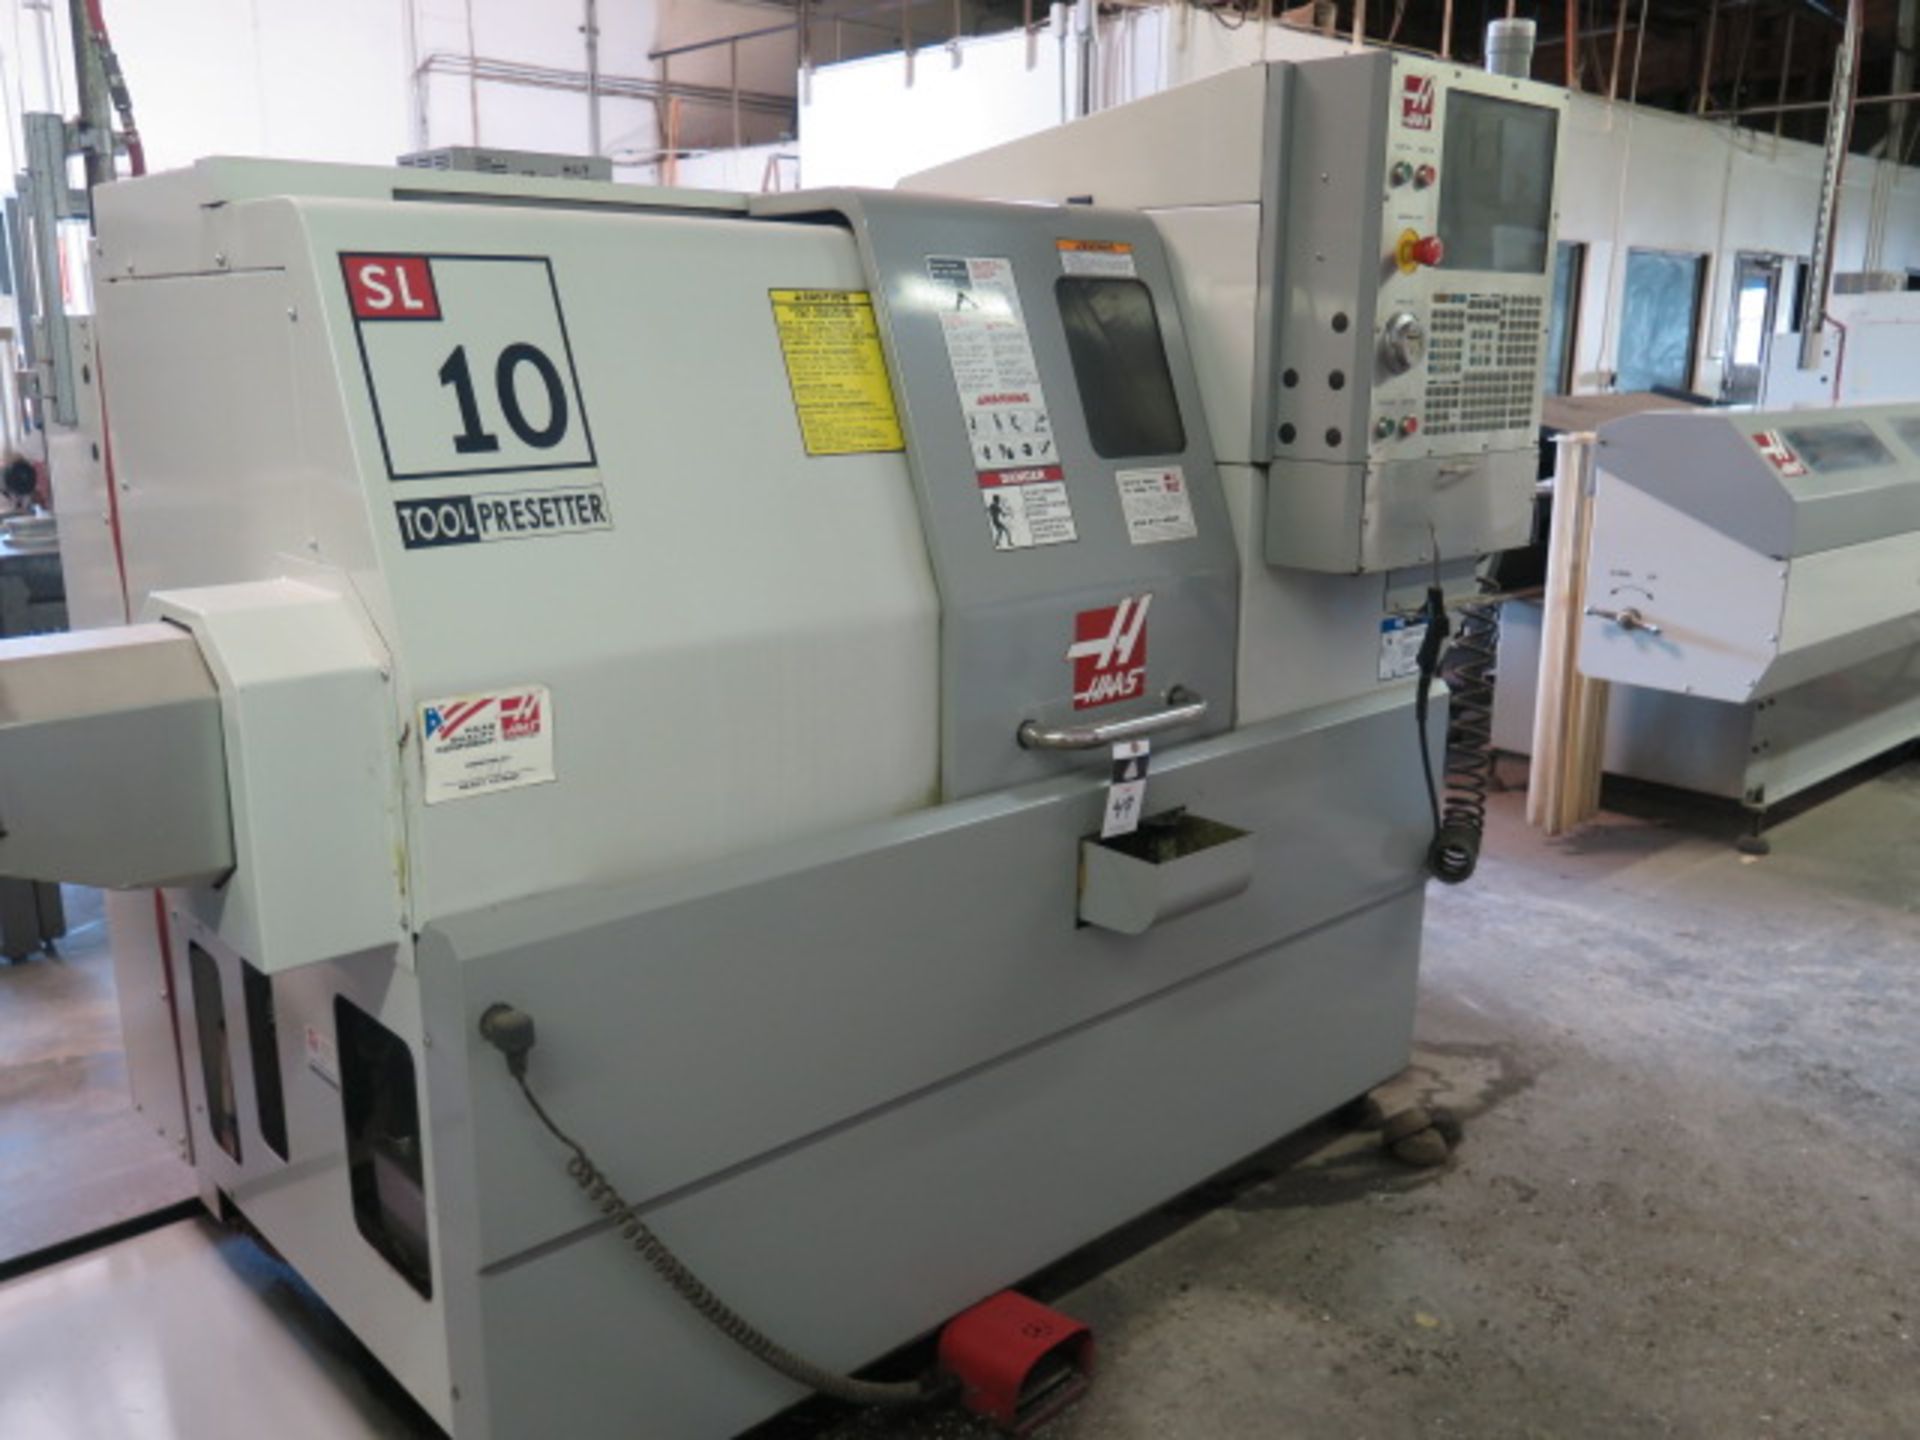 2006 Haas SL-10 CNC Turning Center s/n 3075023, Tool Presetter, 12-Station Turret, SOLD AS IS - Image 3 of 13